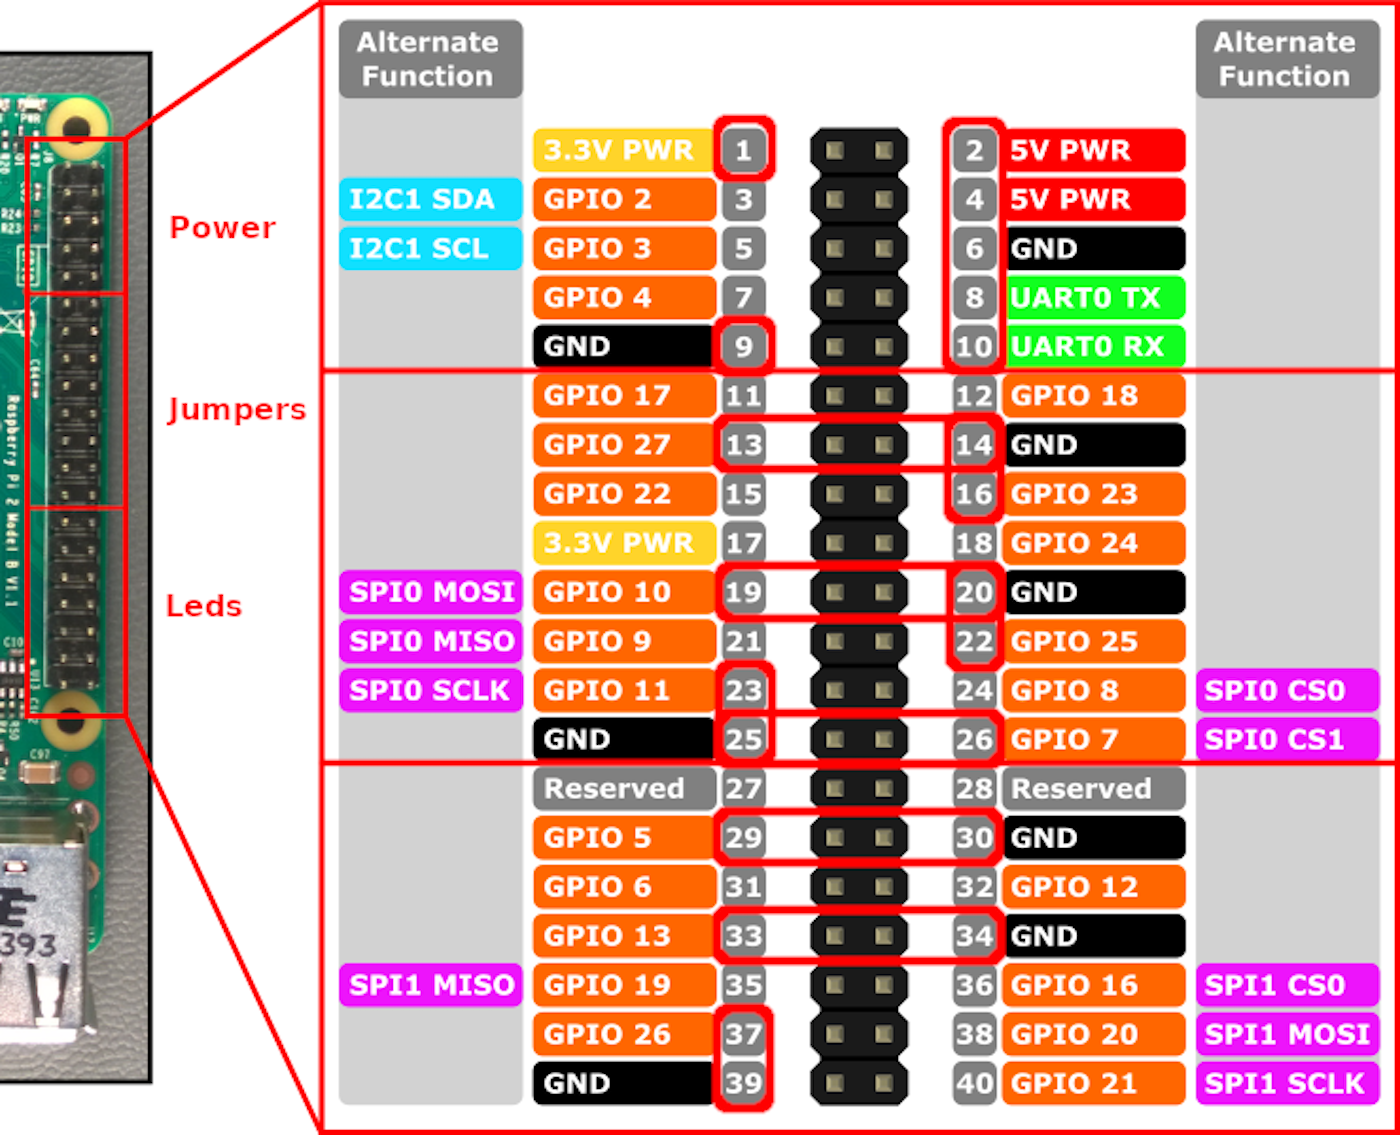 Layout of LEDs, jumpers, and power supply on the board